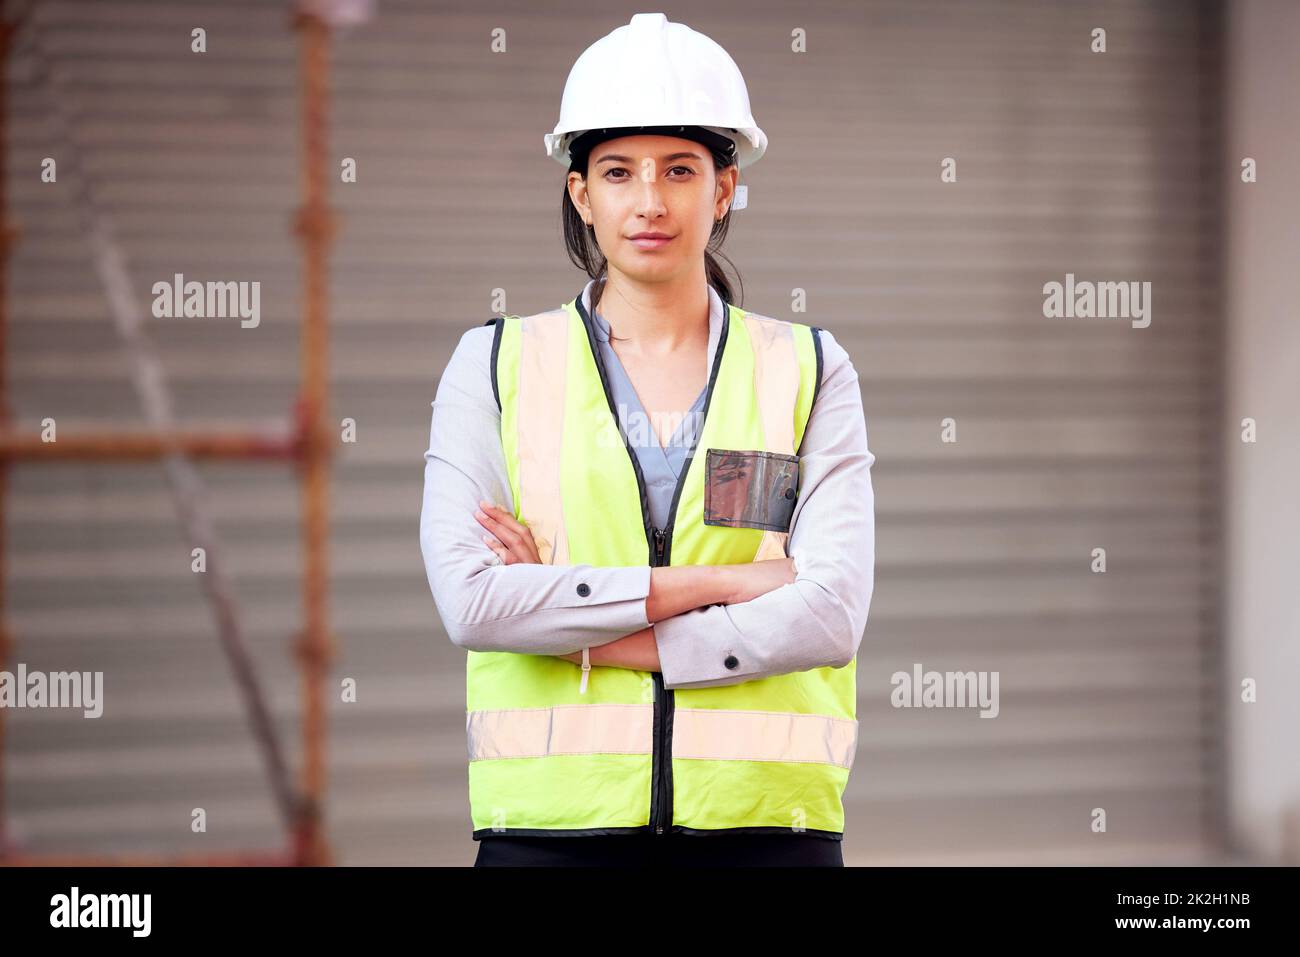 Building this city with my own hands. Shot of a young woman working on a construction site. Stock Photo